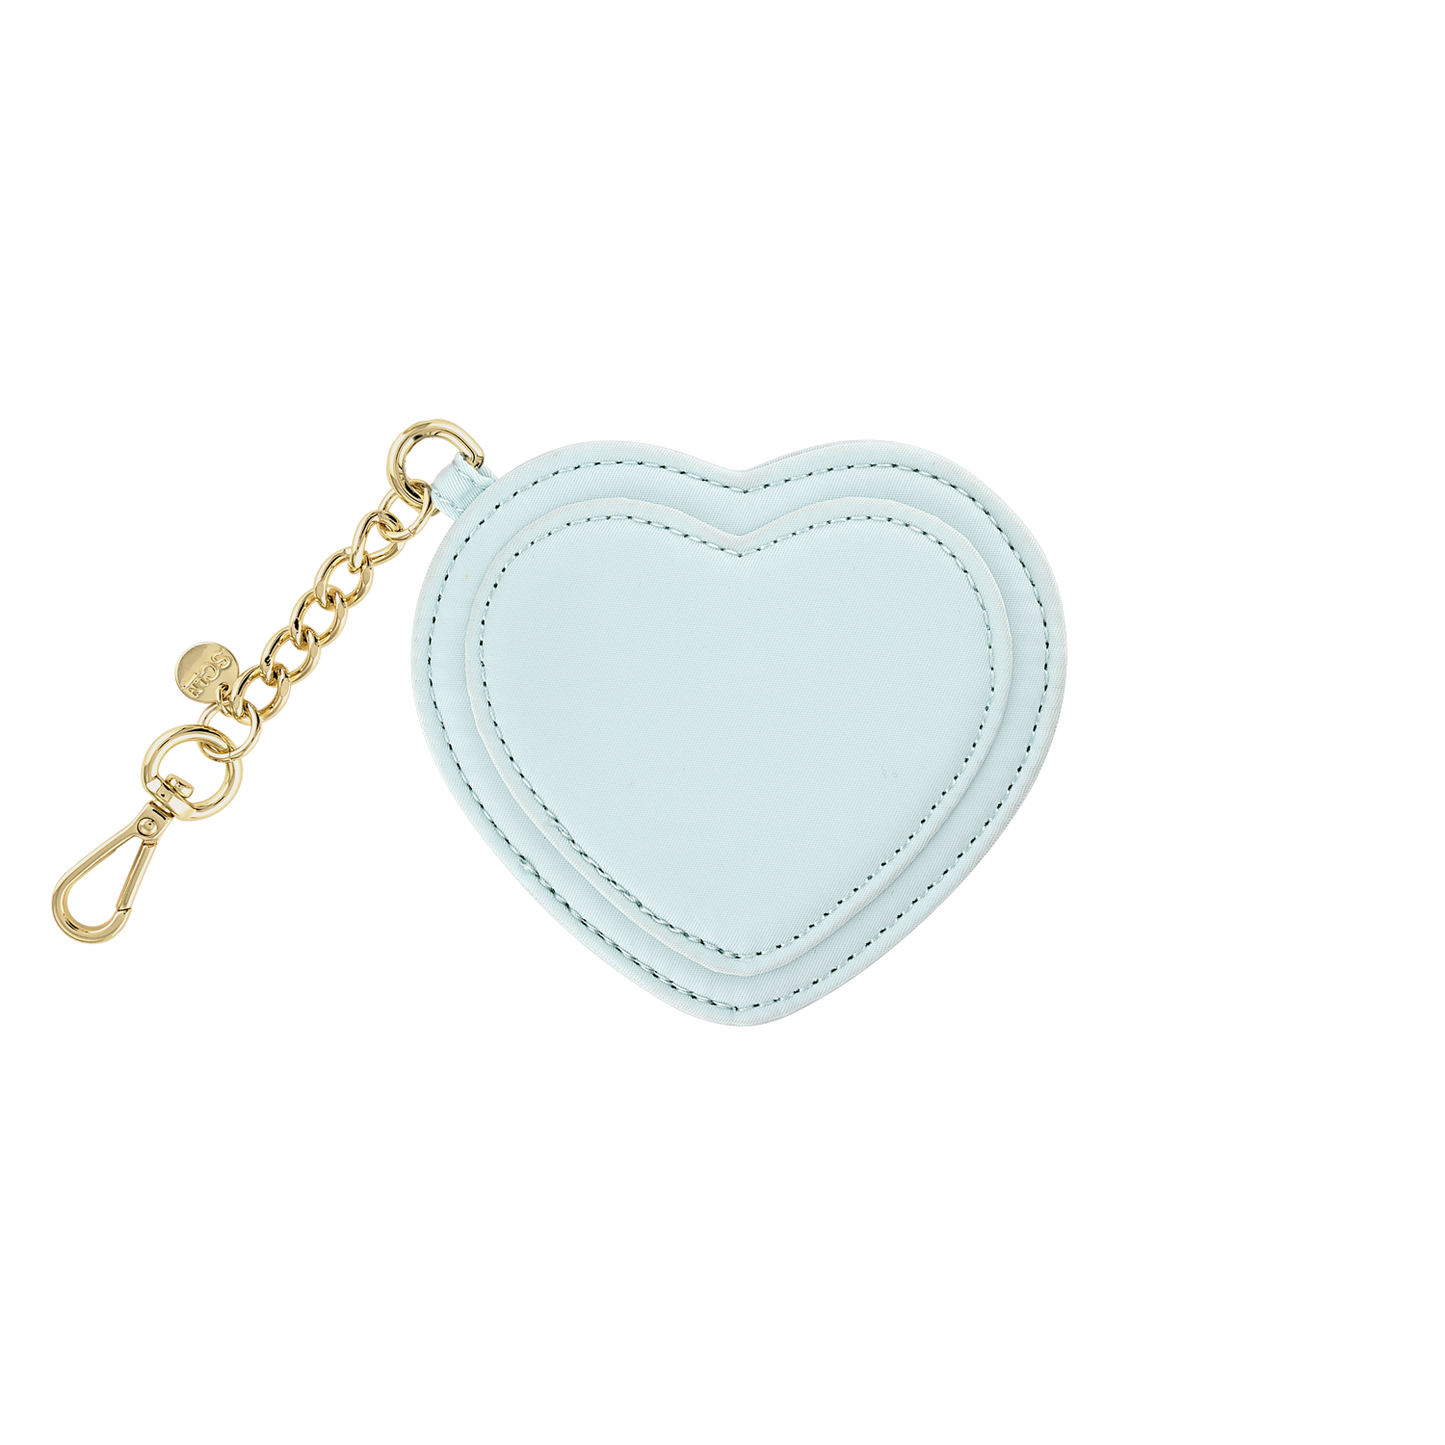 Heart Bag Charms & Keychains - Customizable | Stoney Clover Lane Periwinkle